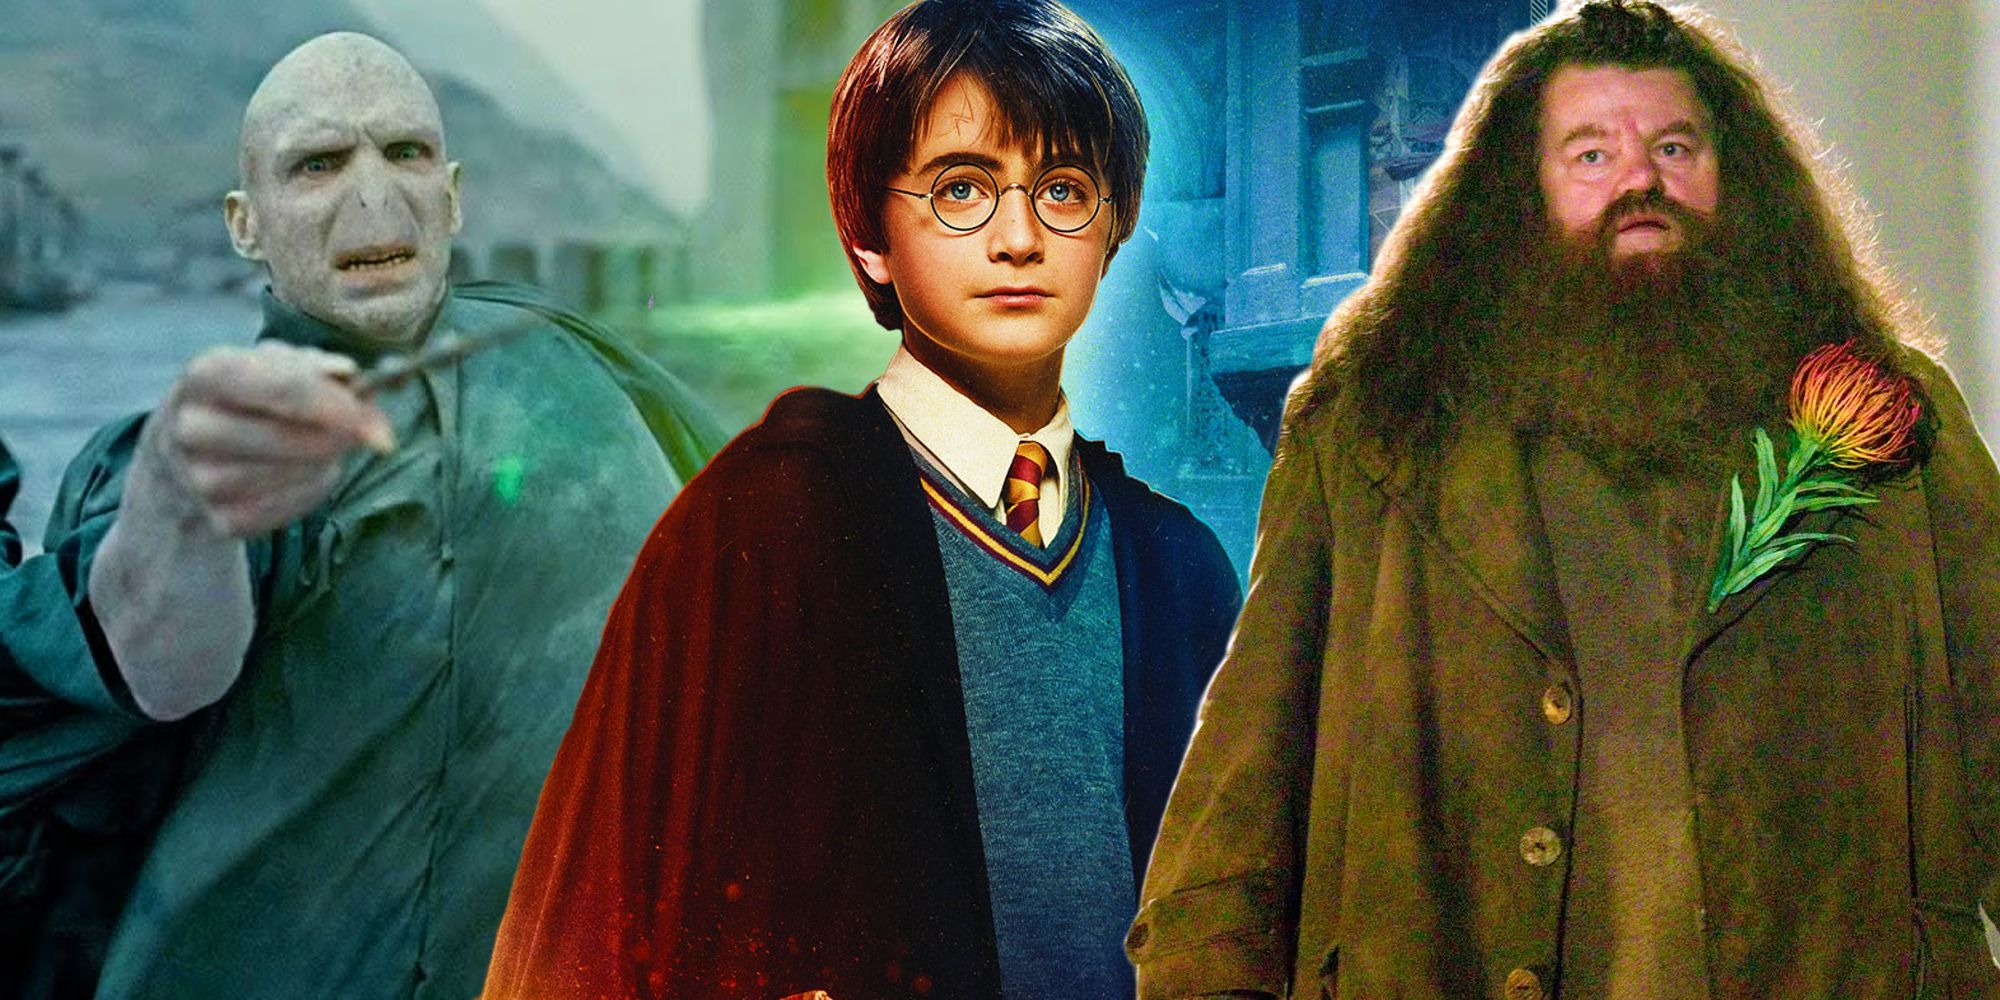 How Old The Harry Potter Cast Was Compared To Their Characters